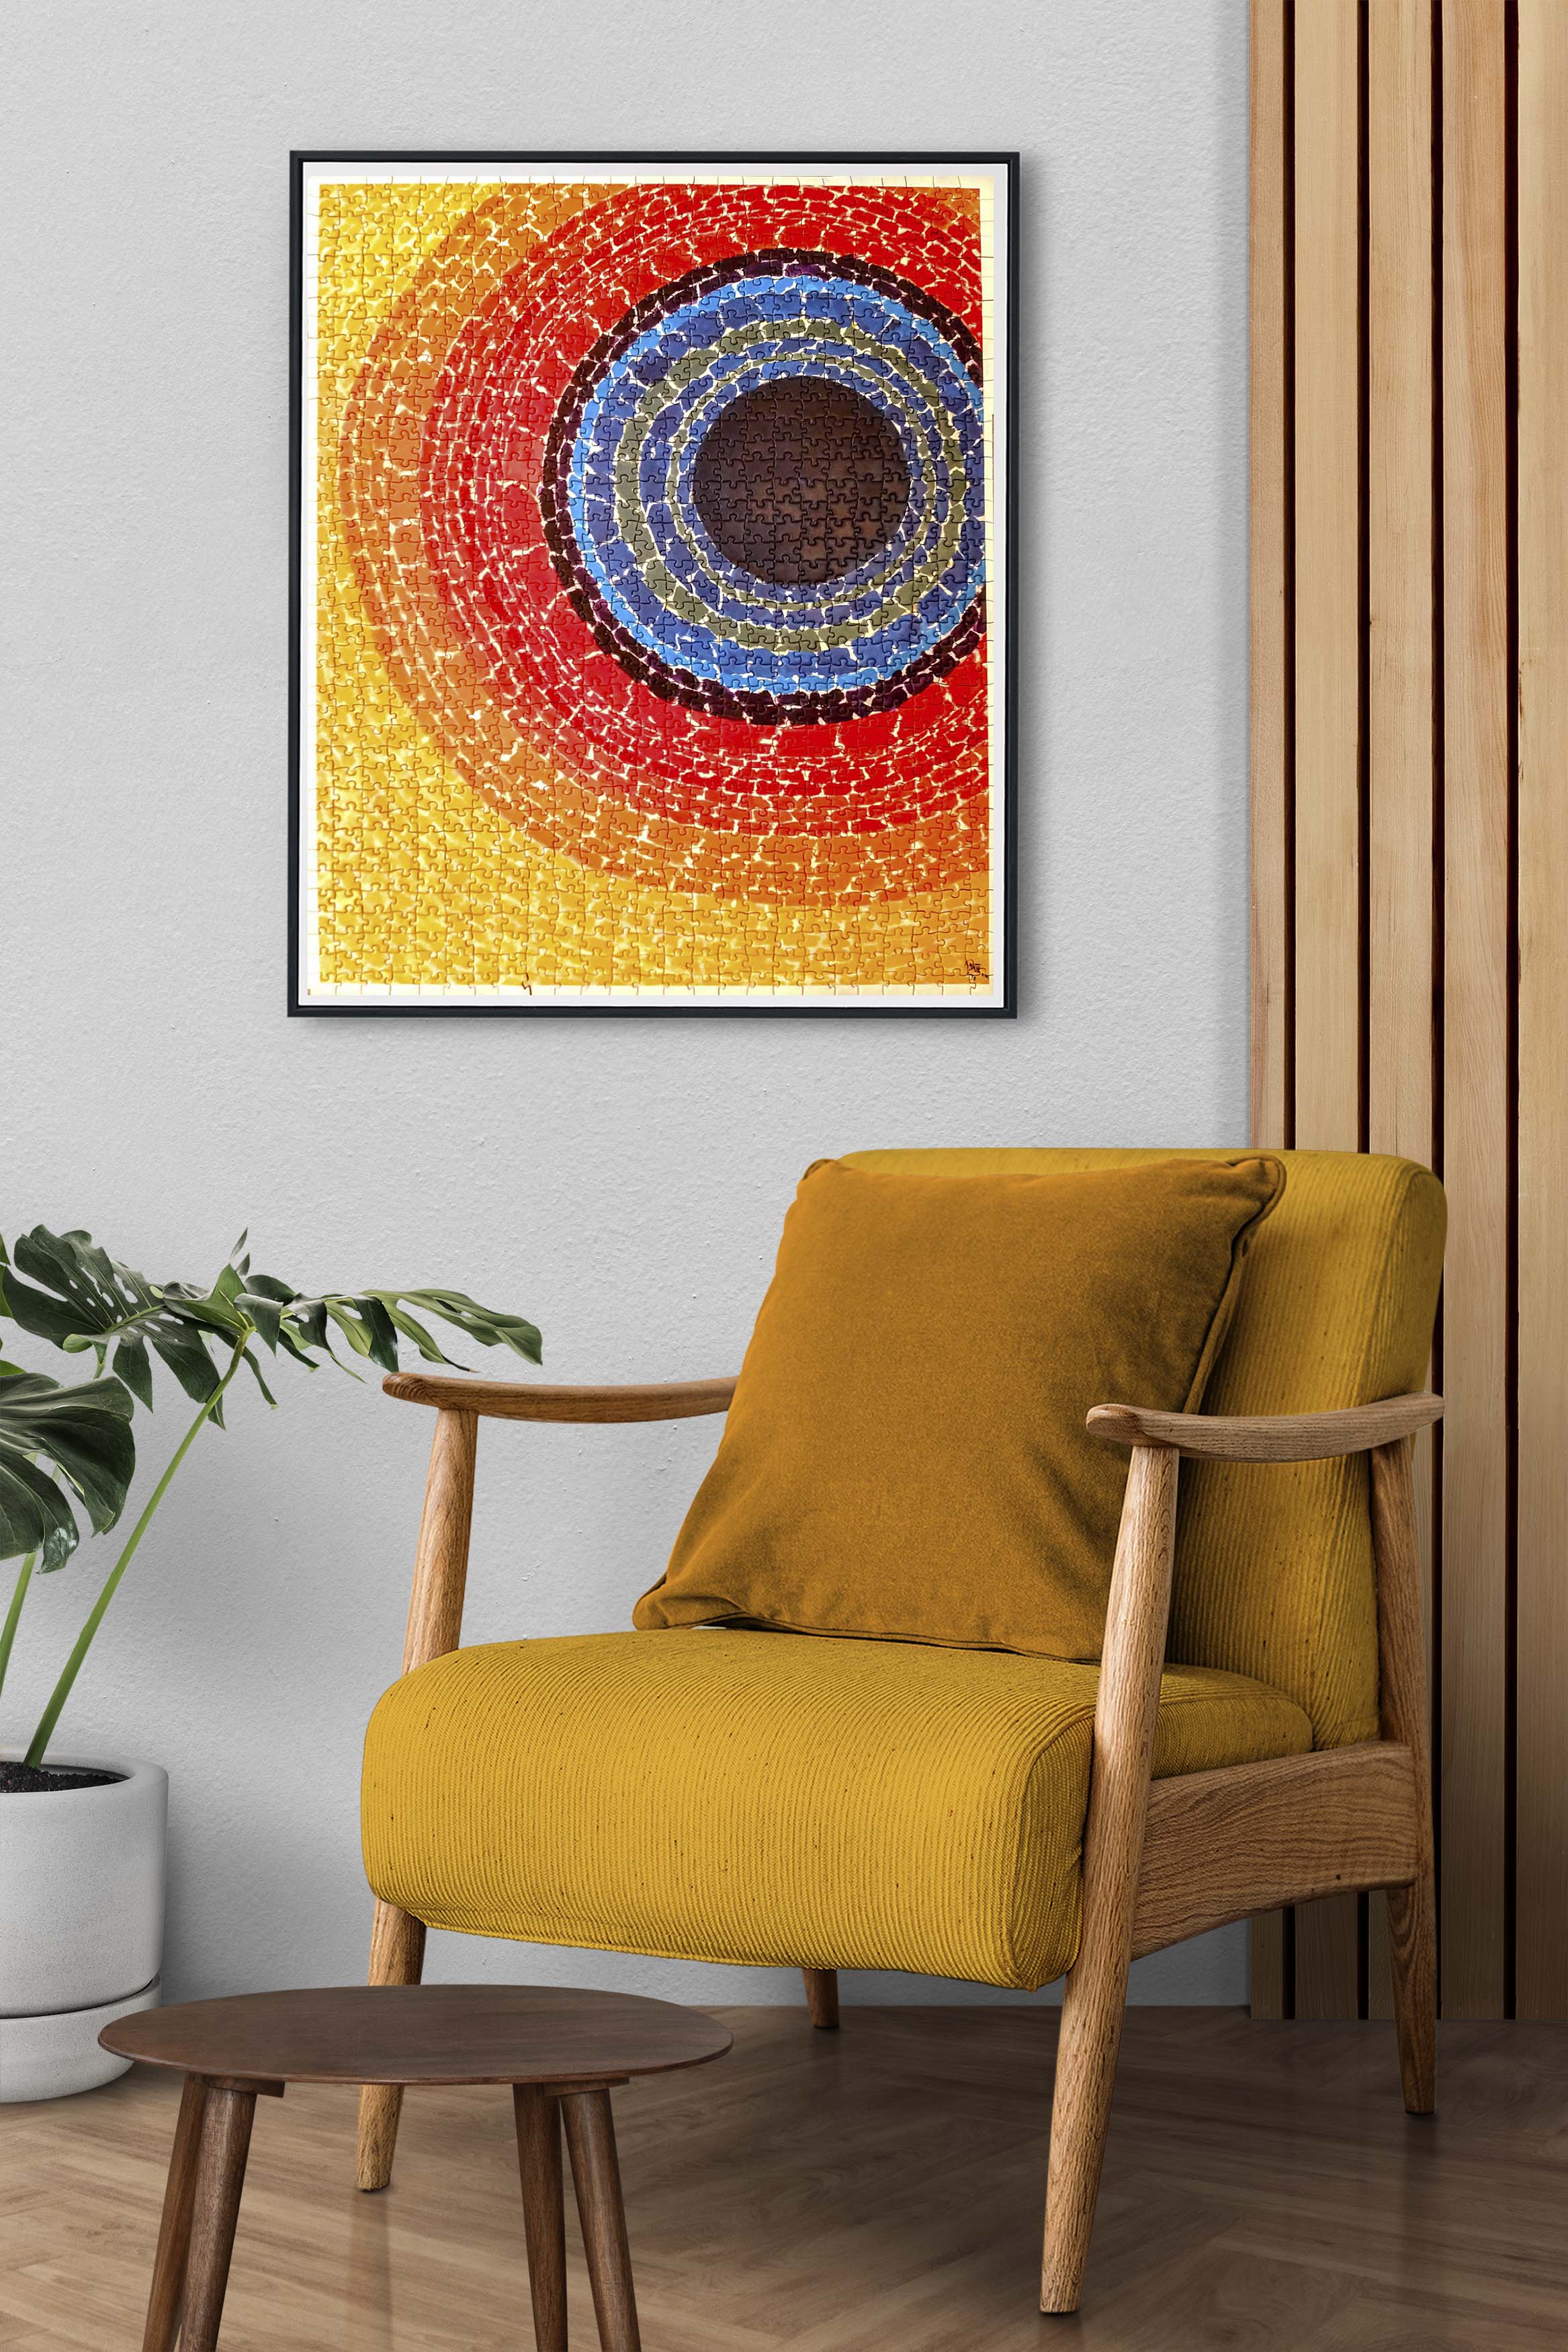 Alma Thomas artwork 'The Eclipse' painting-turned-puzzle is a super difficult jigsaw as well as beautiful wall art.